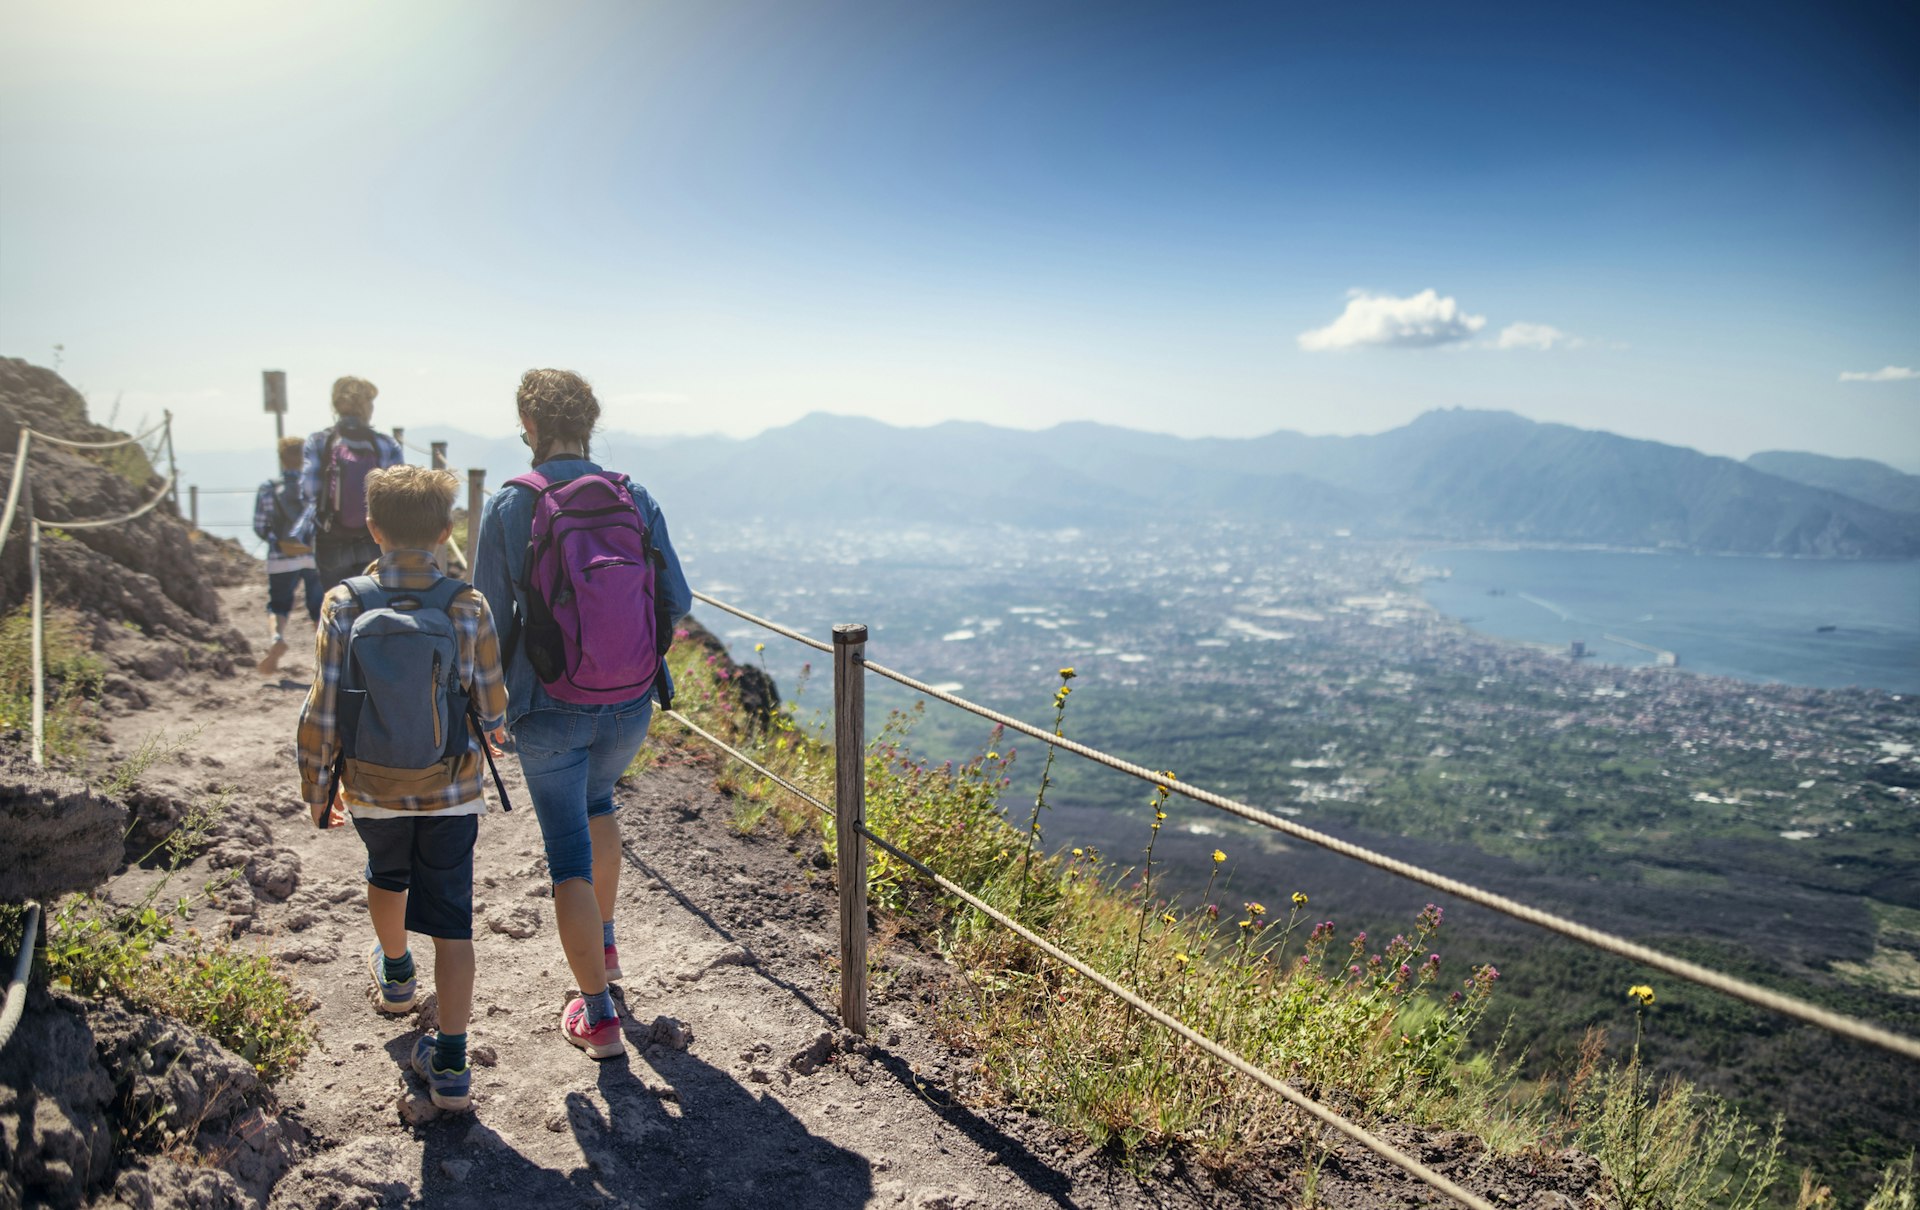 Family walking on the summit of Mount Vesuvius volcano with a view down towards the sea of Naples Bay